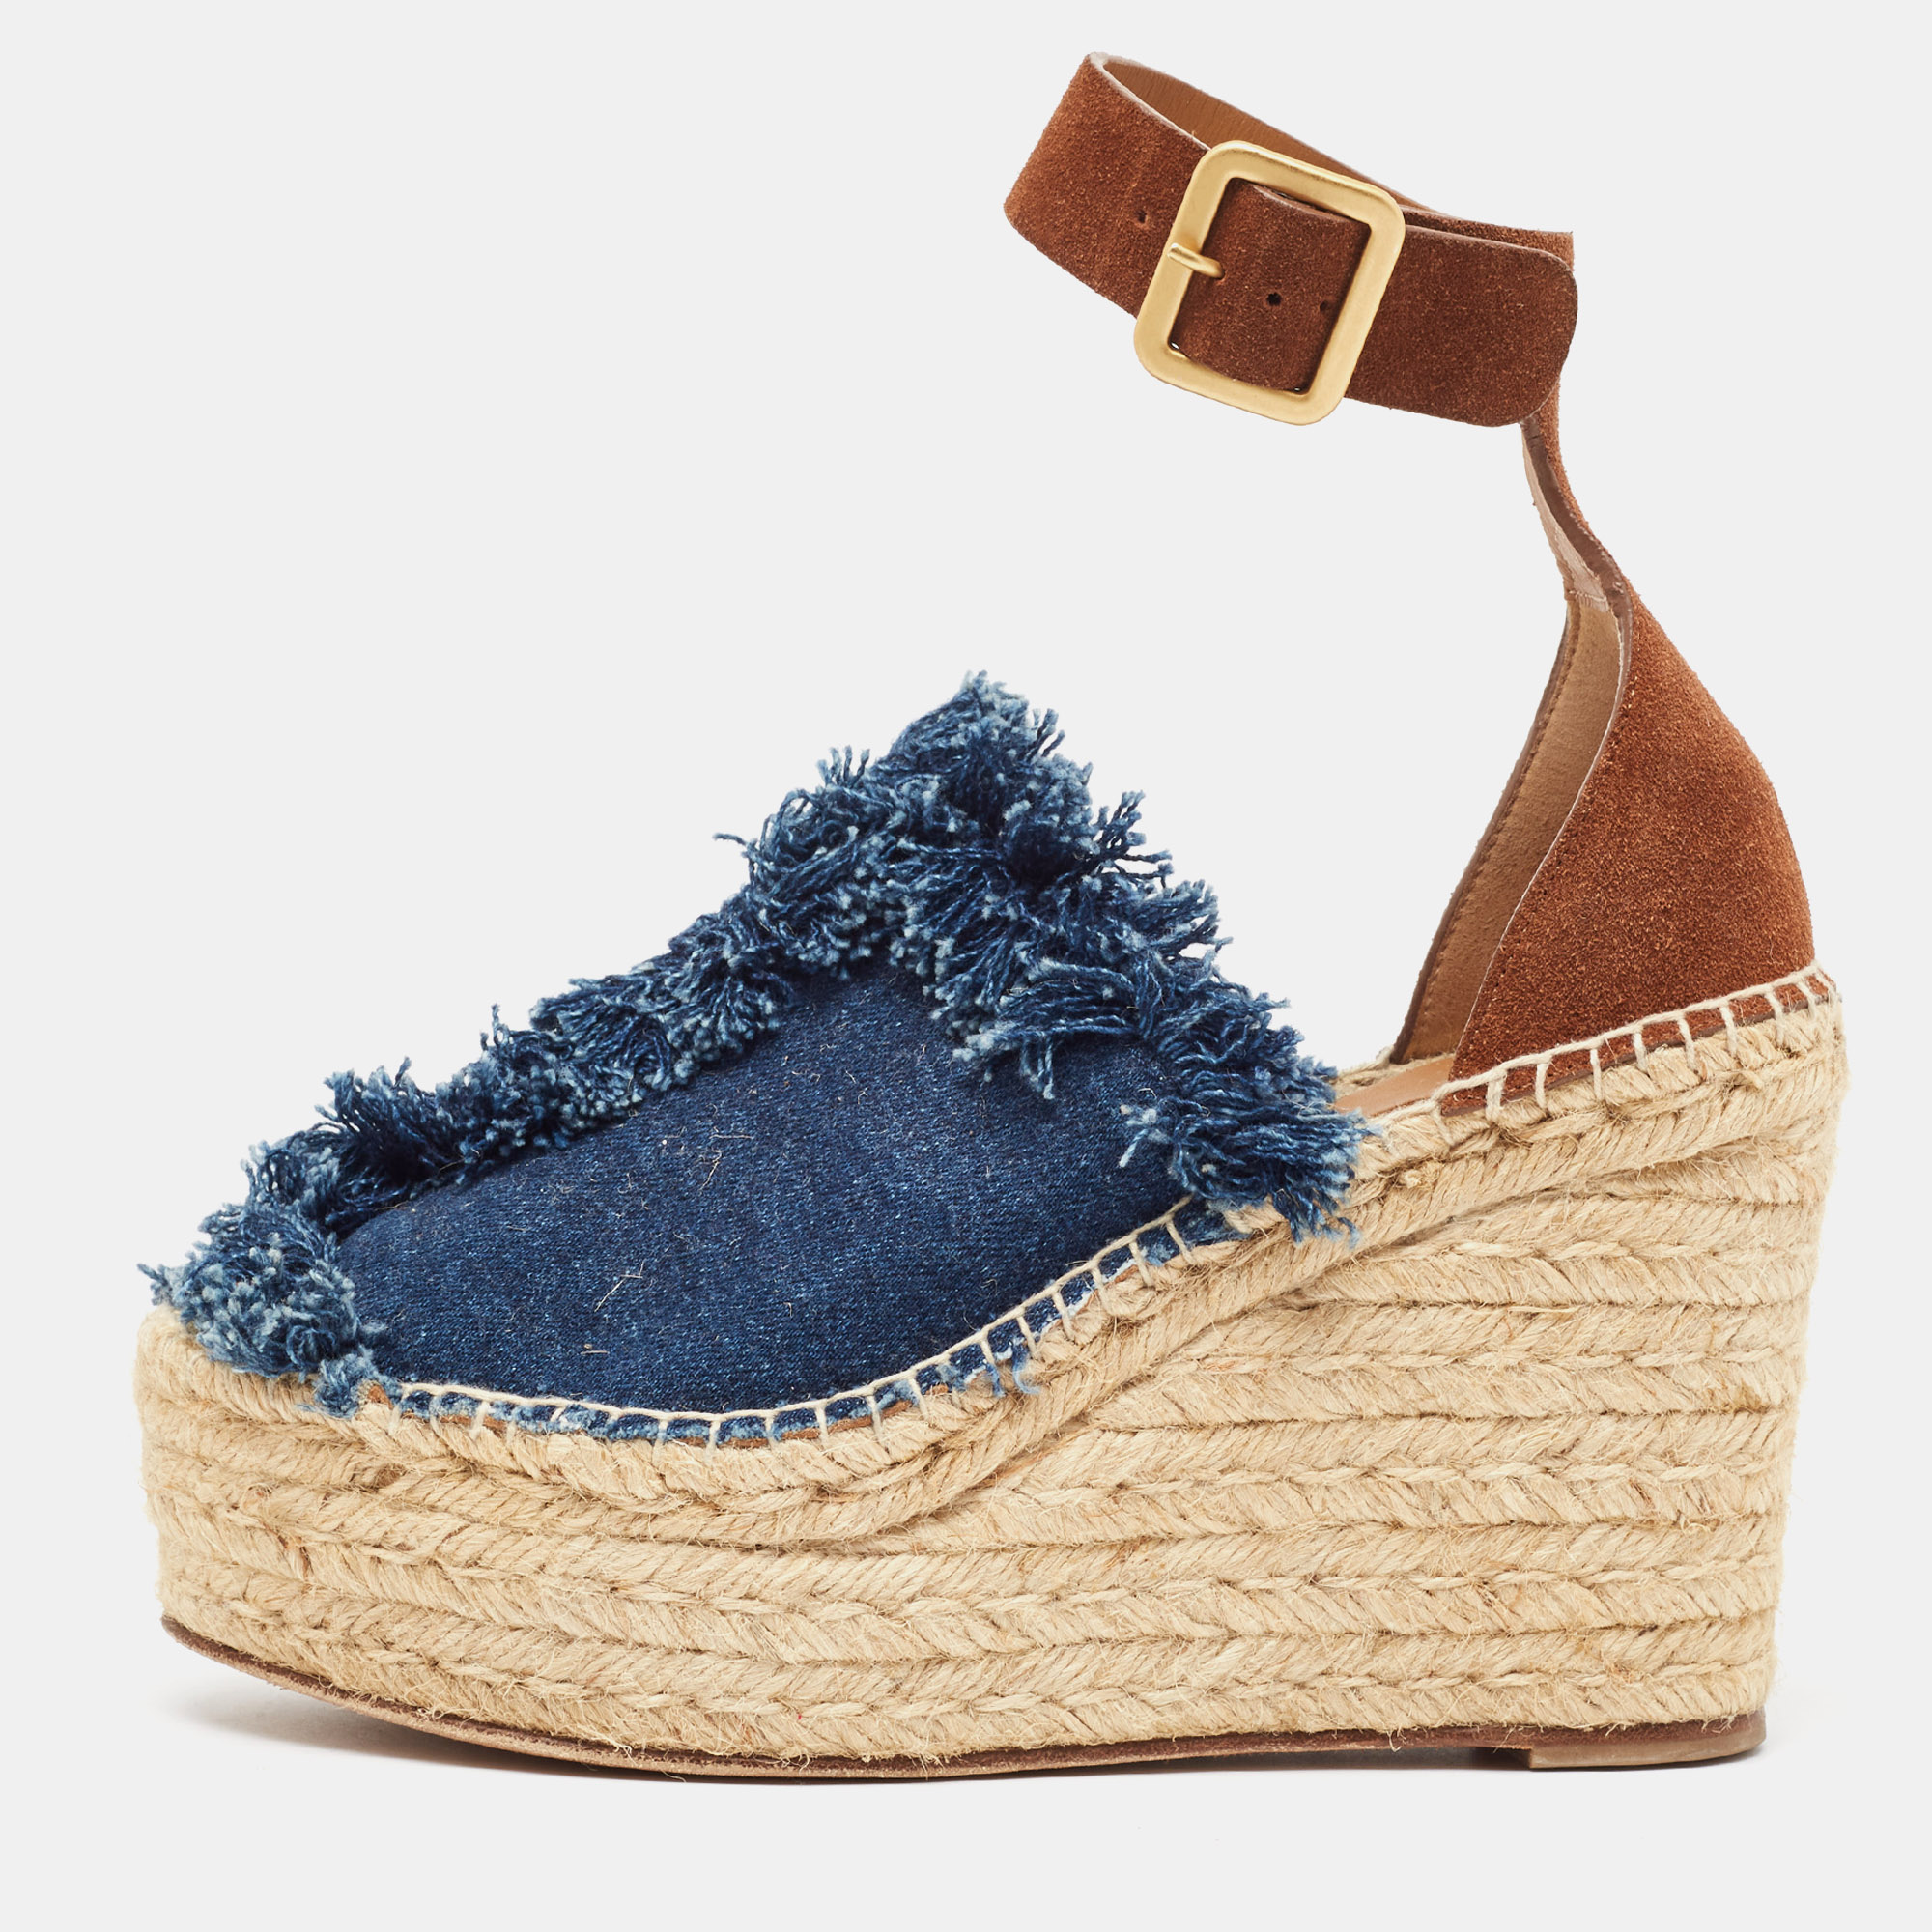 These designer espadrilles exude cool summer vibes while giving all the comfort to your feet. They bring along a well built silhouette and the houses signature aesthetics. Wear them with anything: jeans dresses shorts.